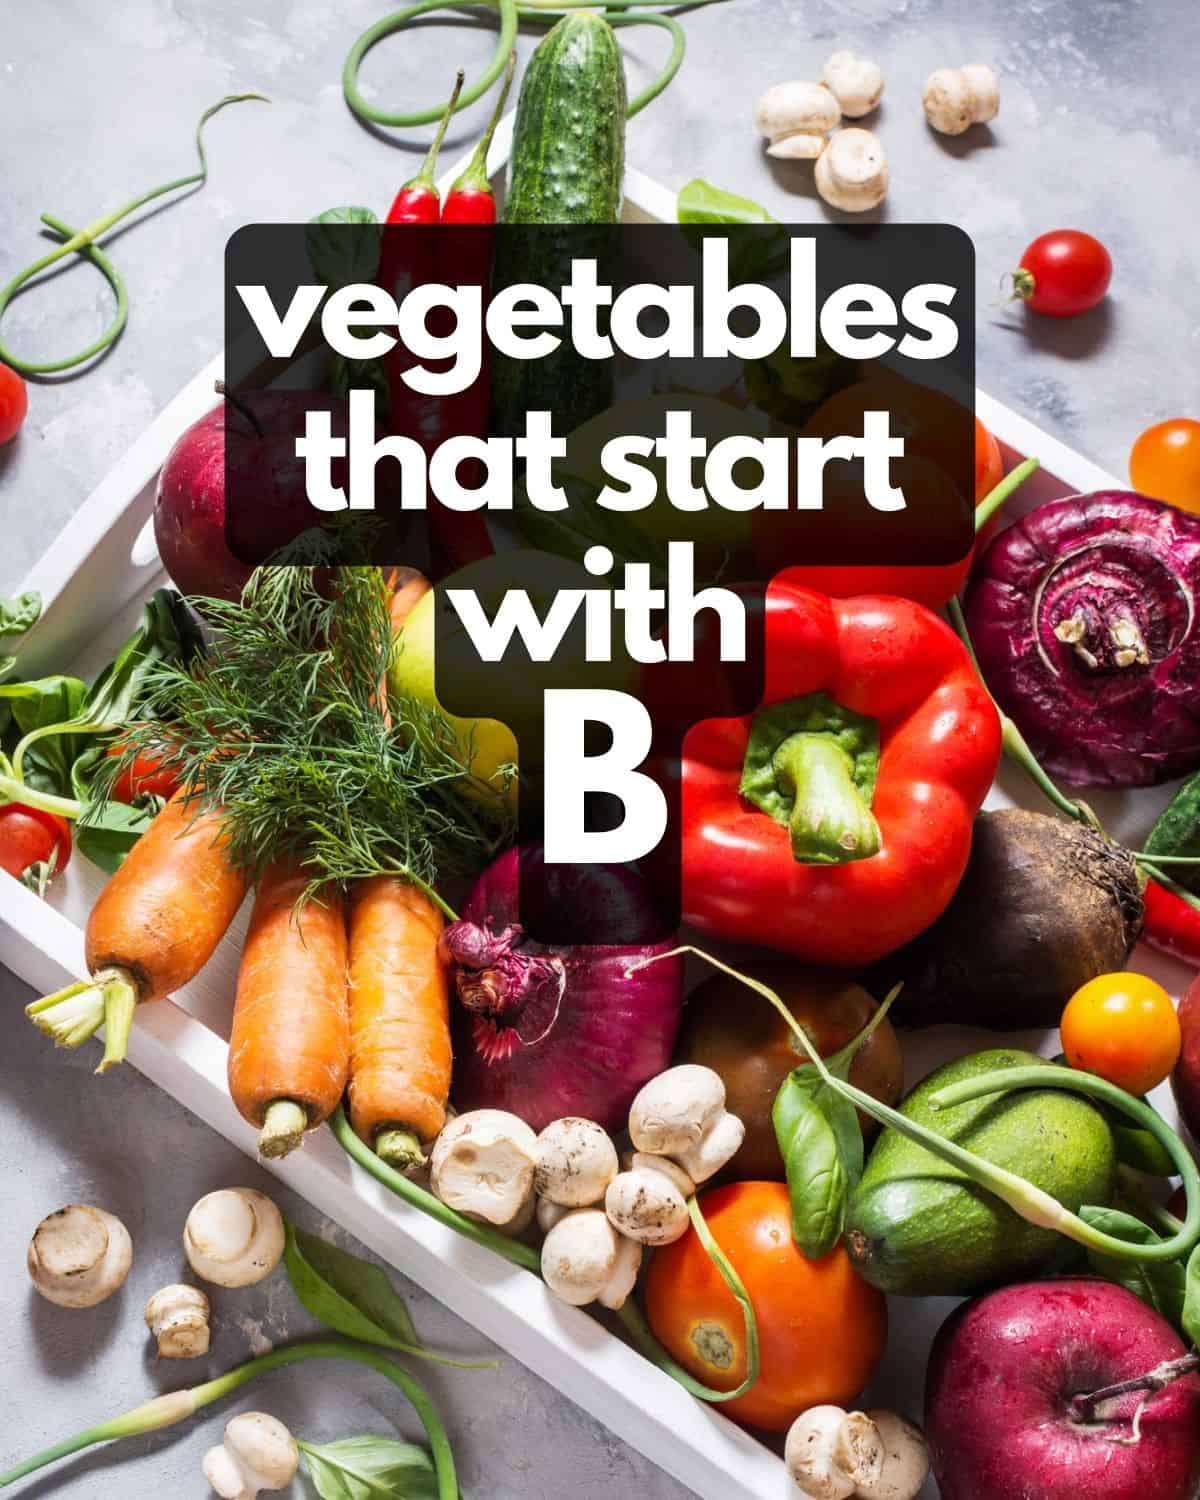 Table of vegetables, plus text: Vegetables that start with B.